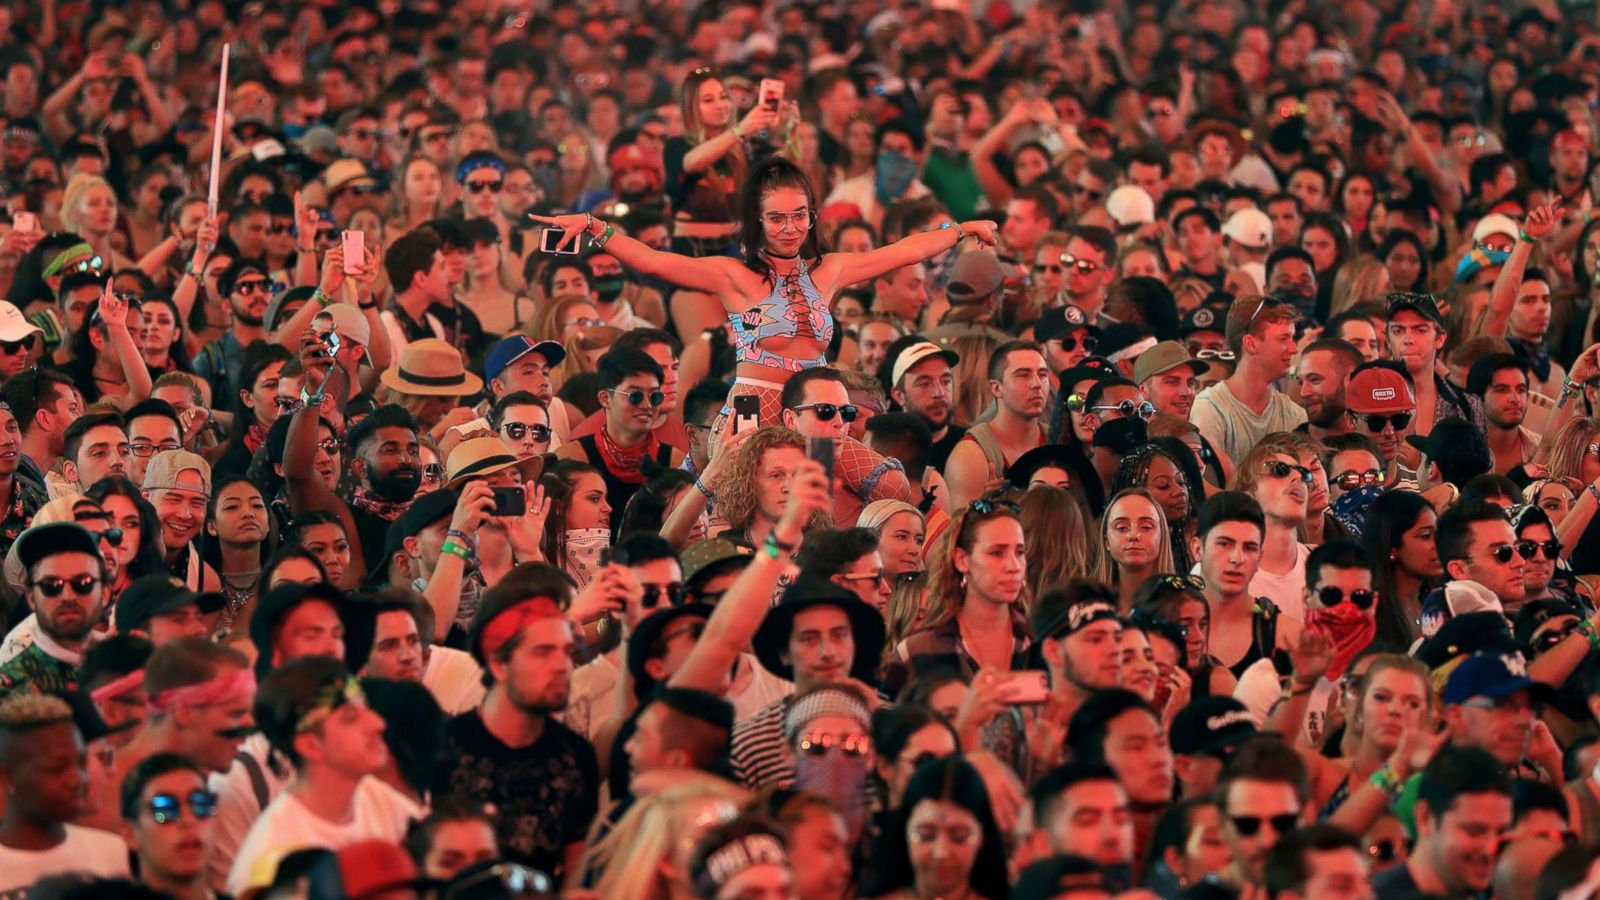 PHOTO: Festivalgoers attend the 2018 Coachella Valley Music and Arts Festival Weekend 1 at the Empire Polo Field on April 15, 2018, in Indio, Calif.